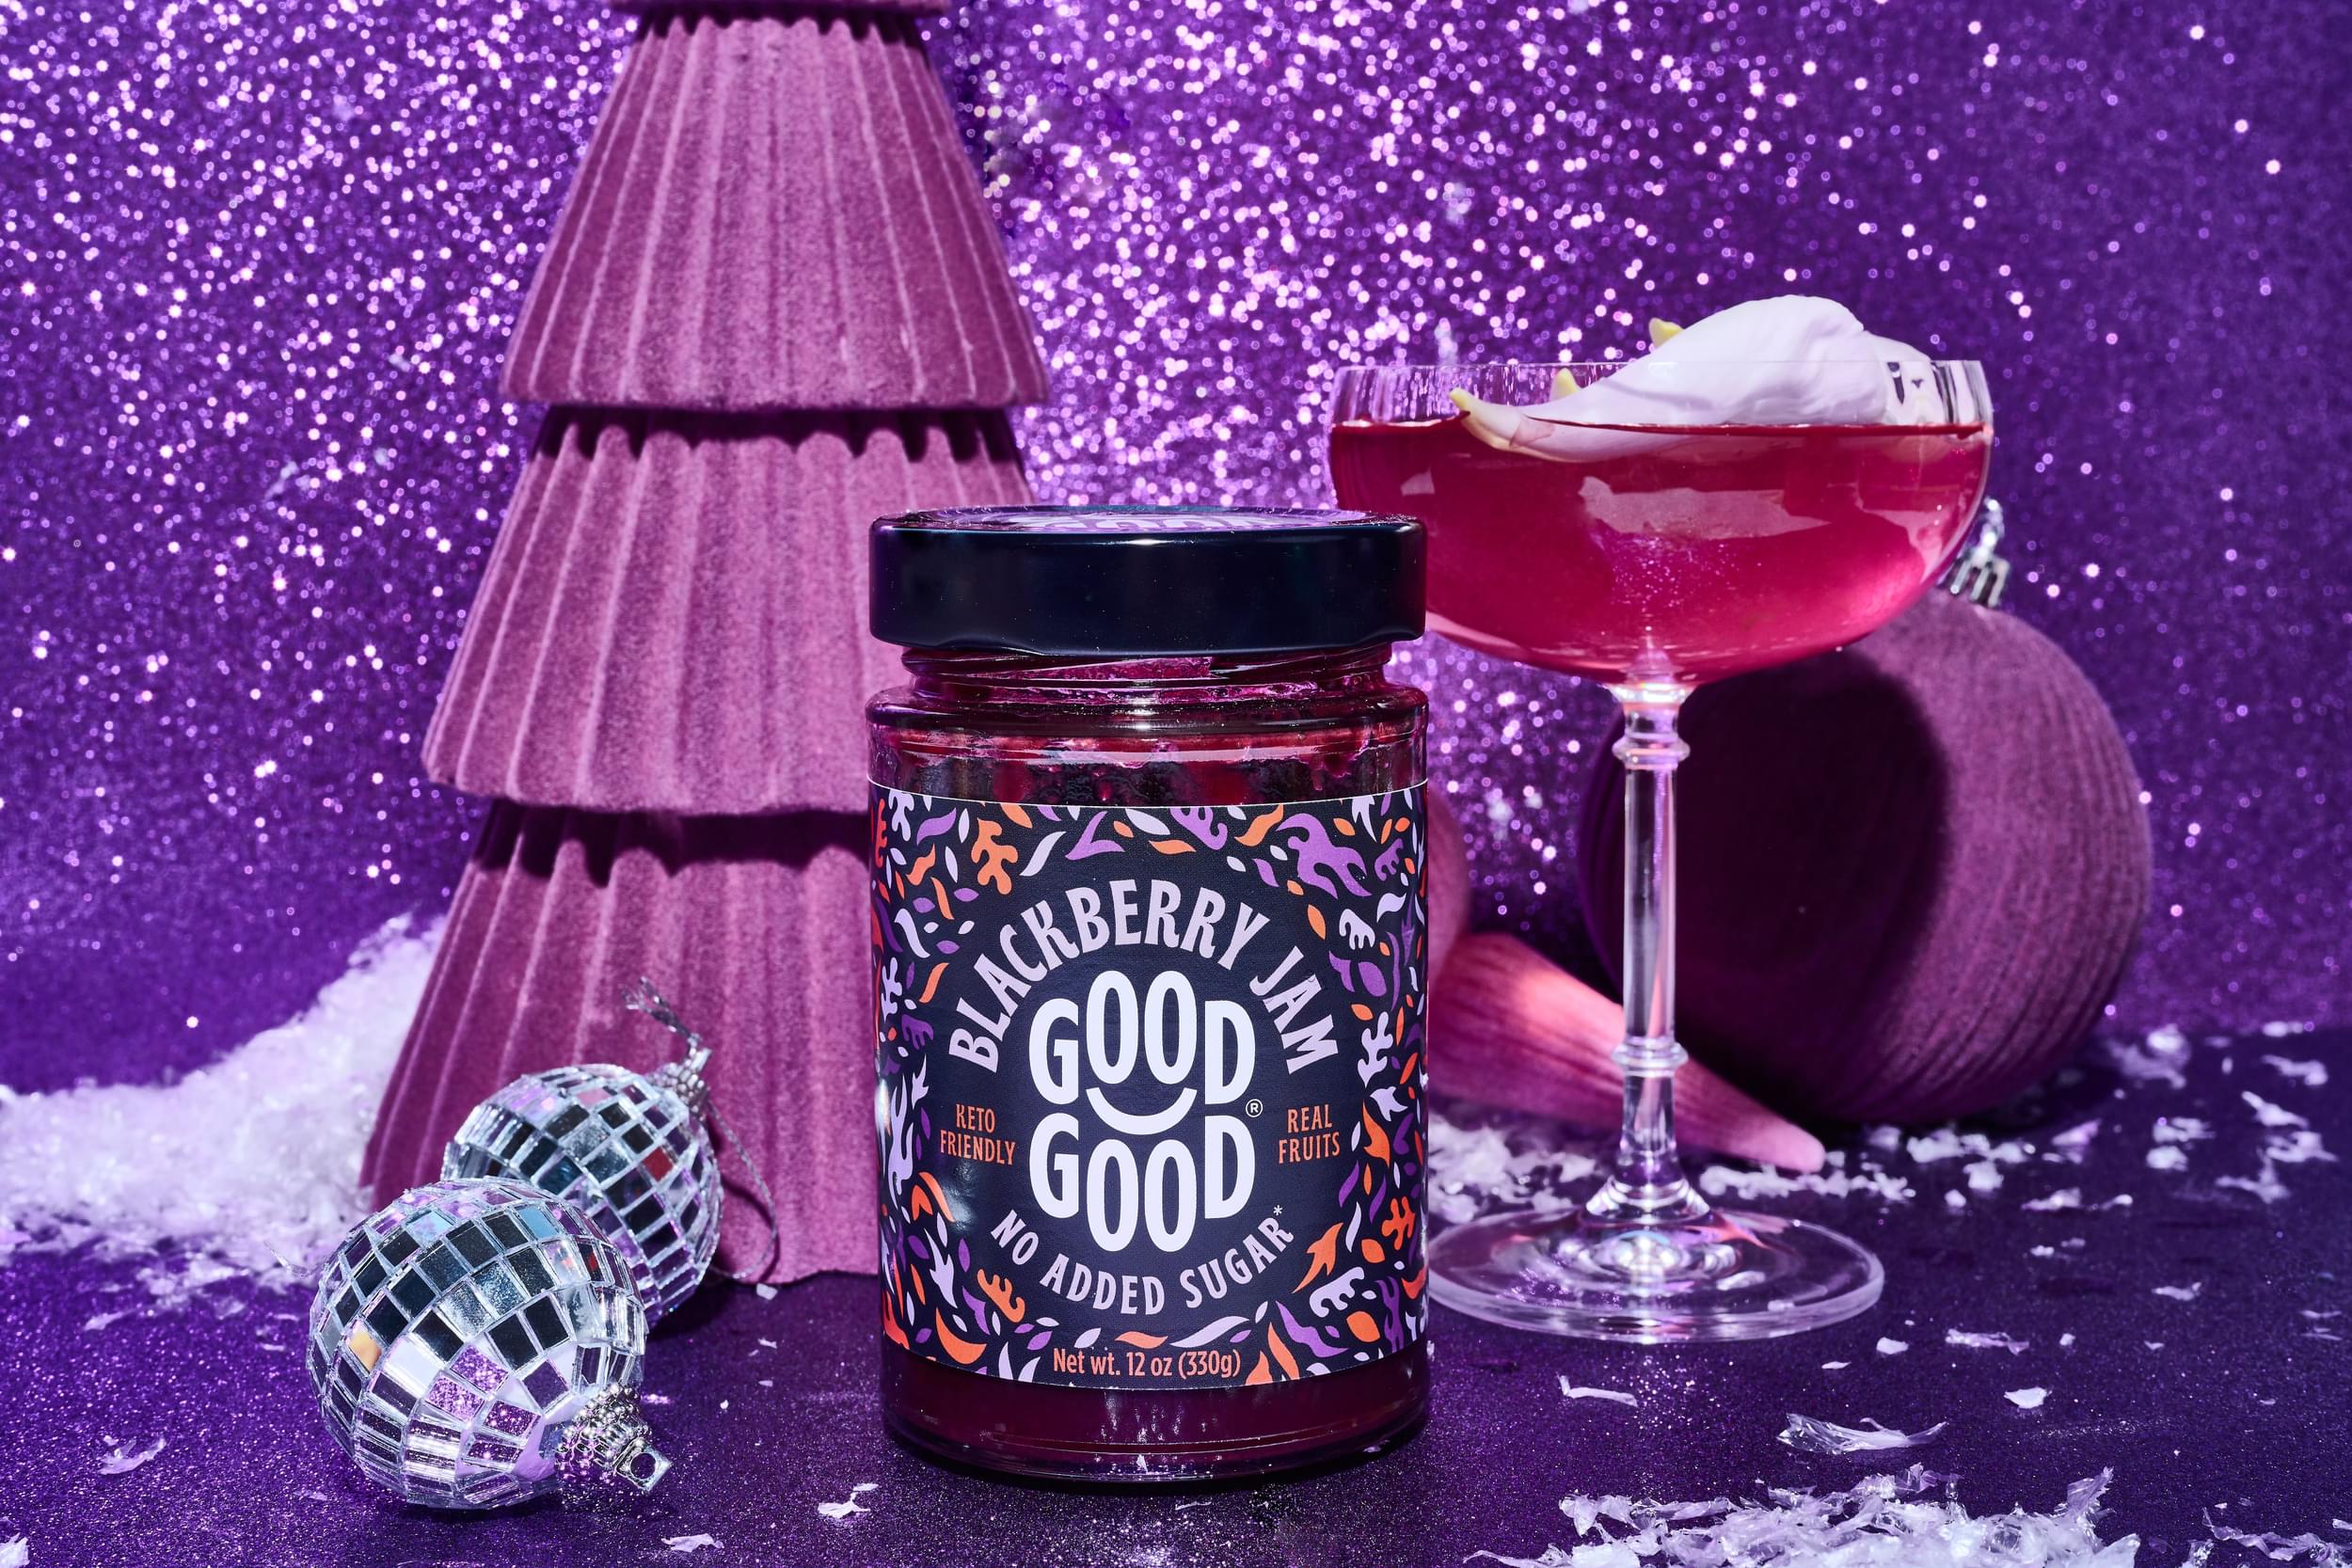 Meet Me at Midnight: Blackberry Cocktail